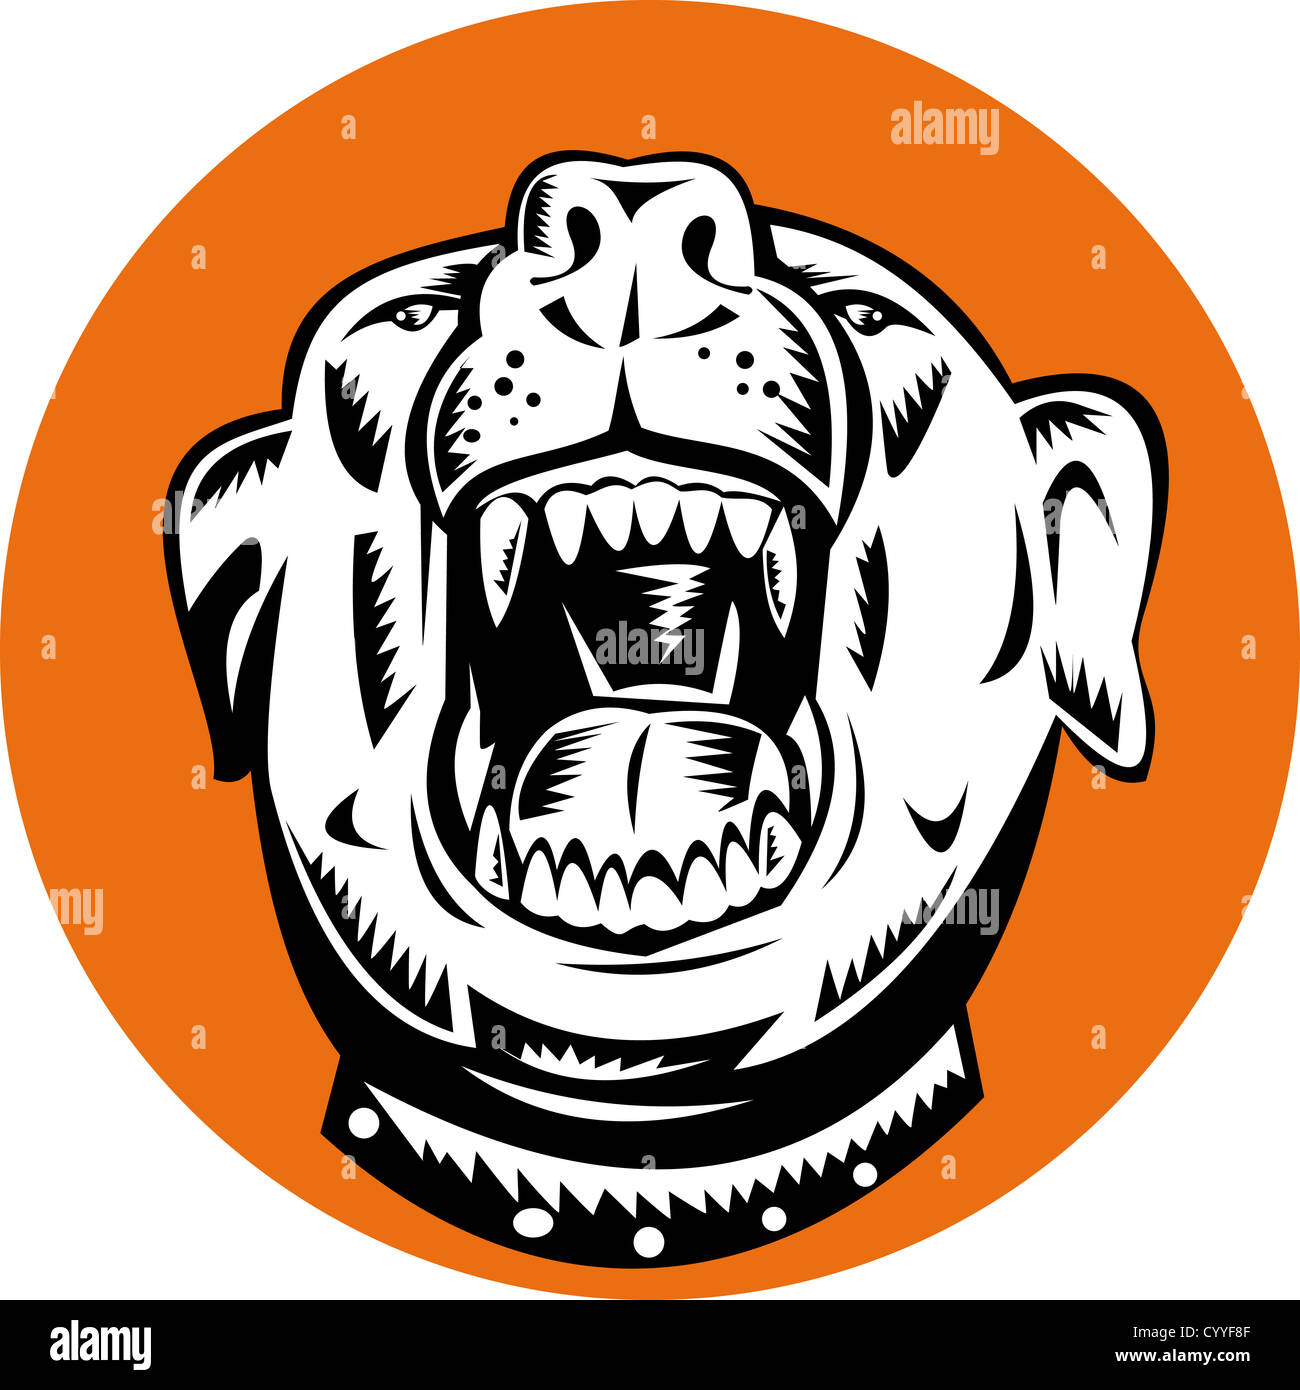 Illustration of an angry barking mongrel dog on white background. Stock Photo